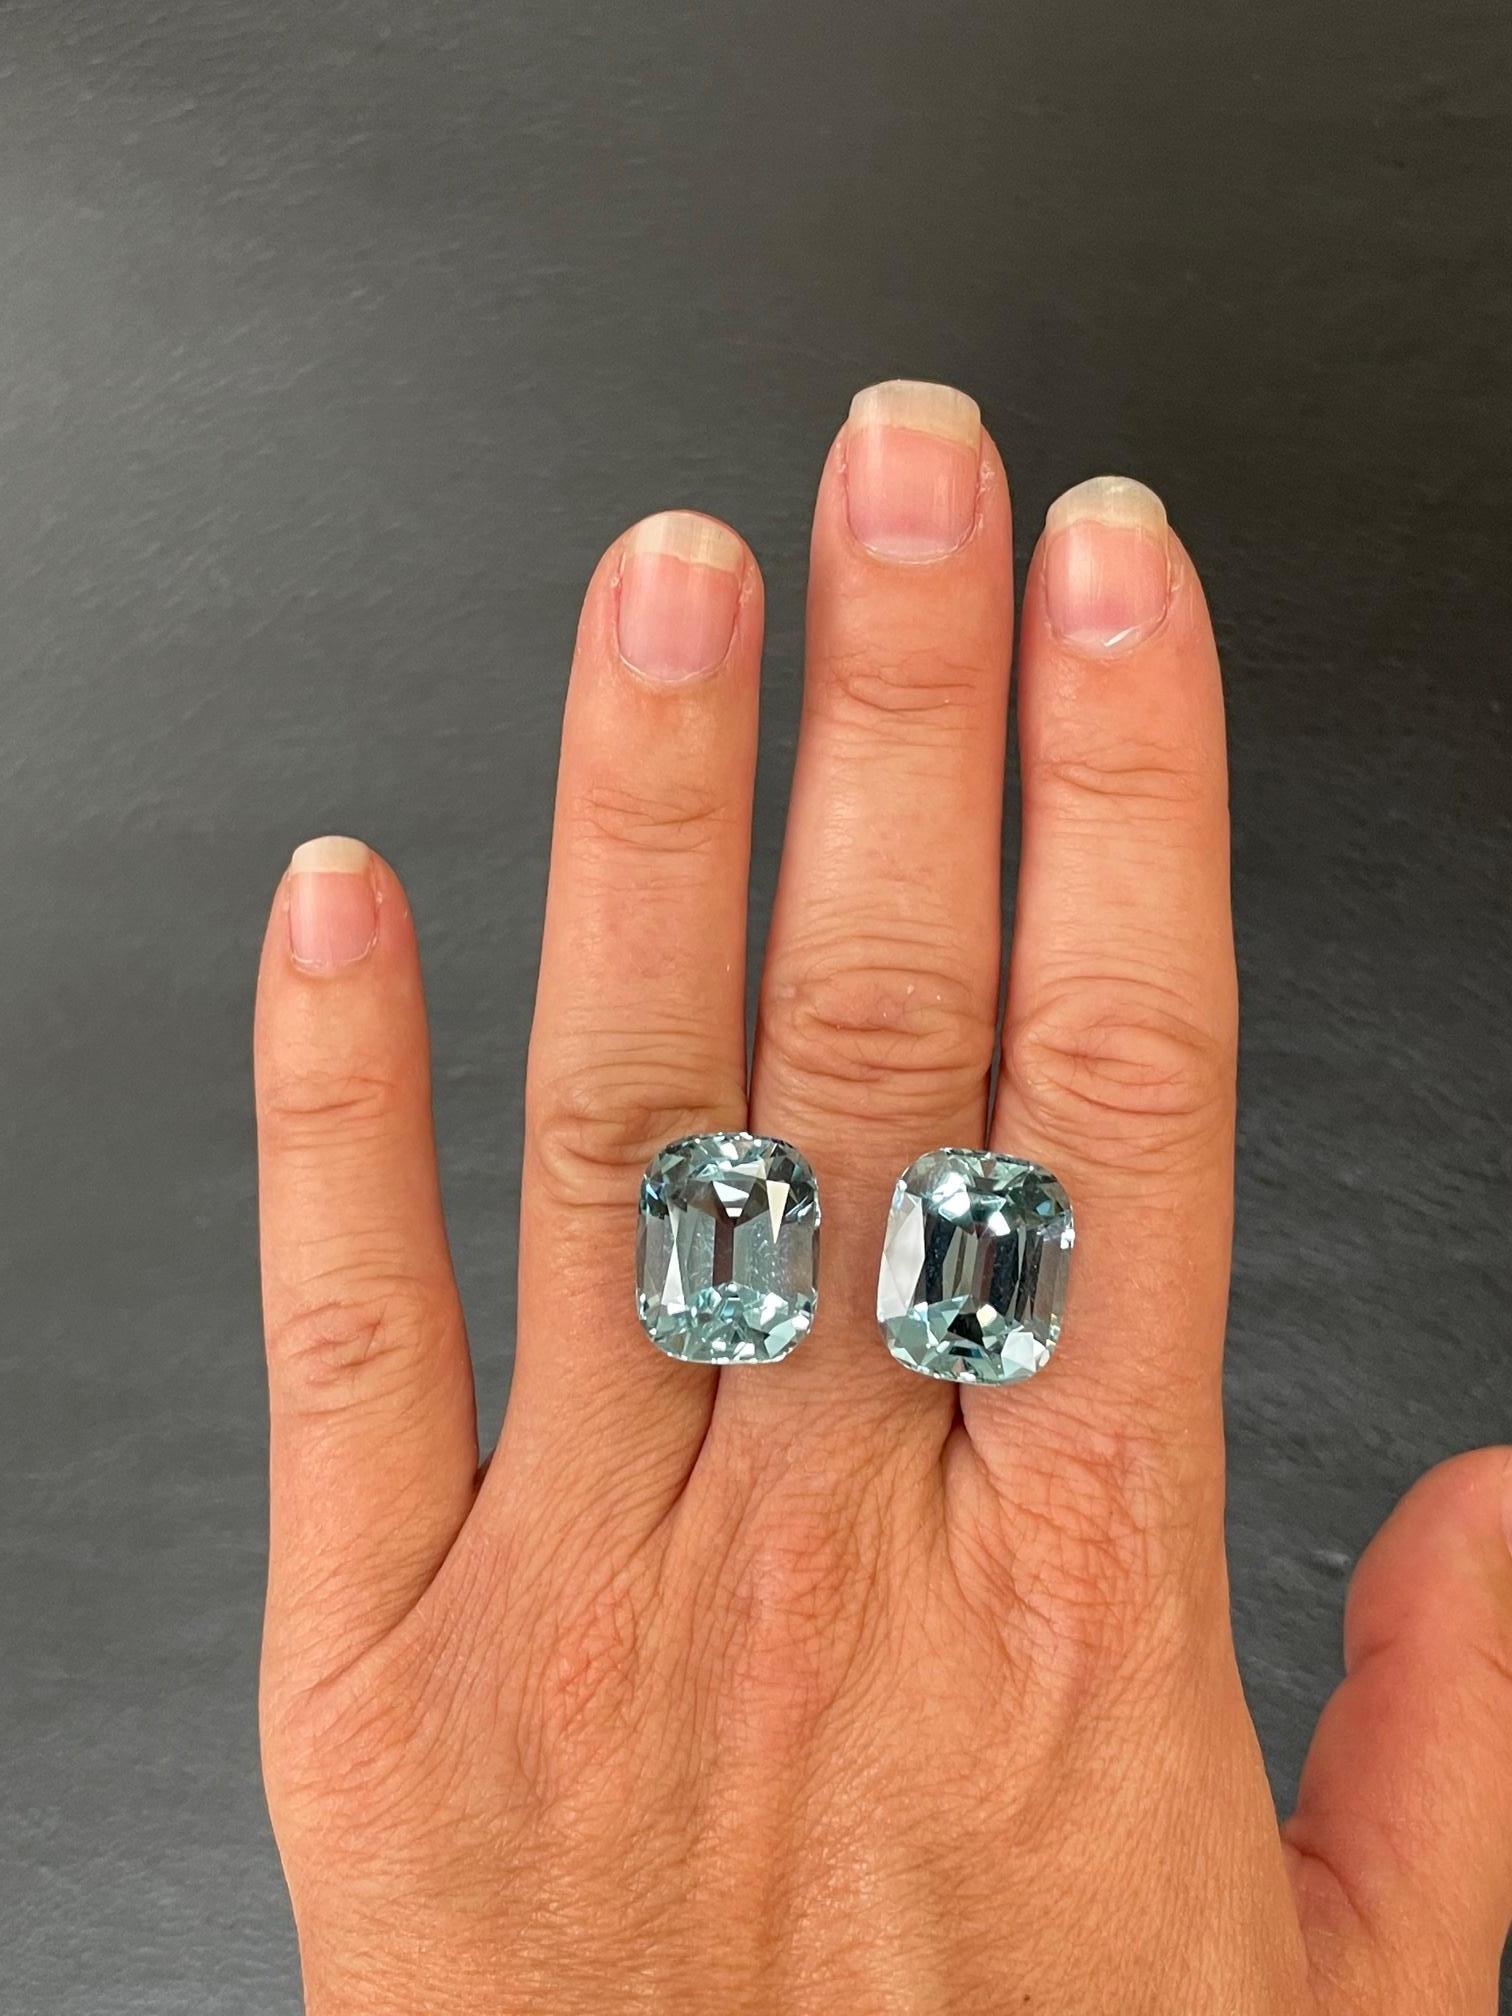 Spectacular Brazilian Aquamarine earring gems, weighing a total of 31.08 carats, offered loose to a fine gemstone lover.
Returns are accepted and paid by us within 7 days of delivery.
We offer supreme custom jewelry work upon request. Please contact